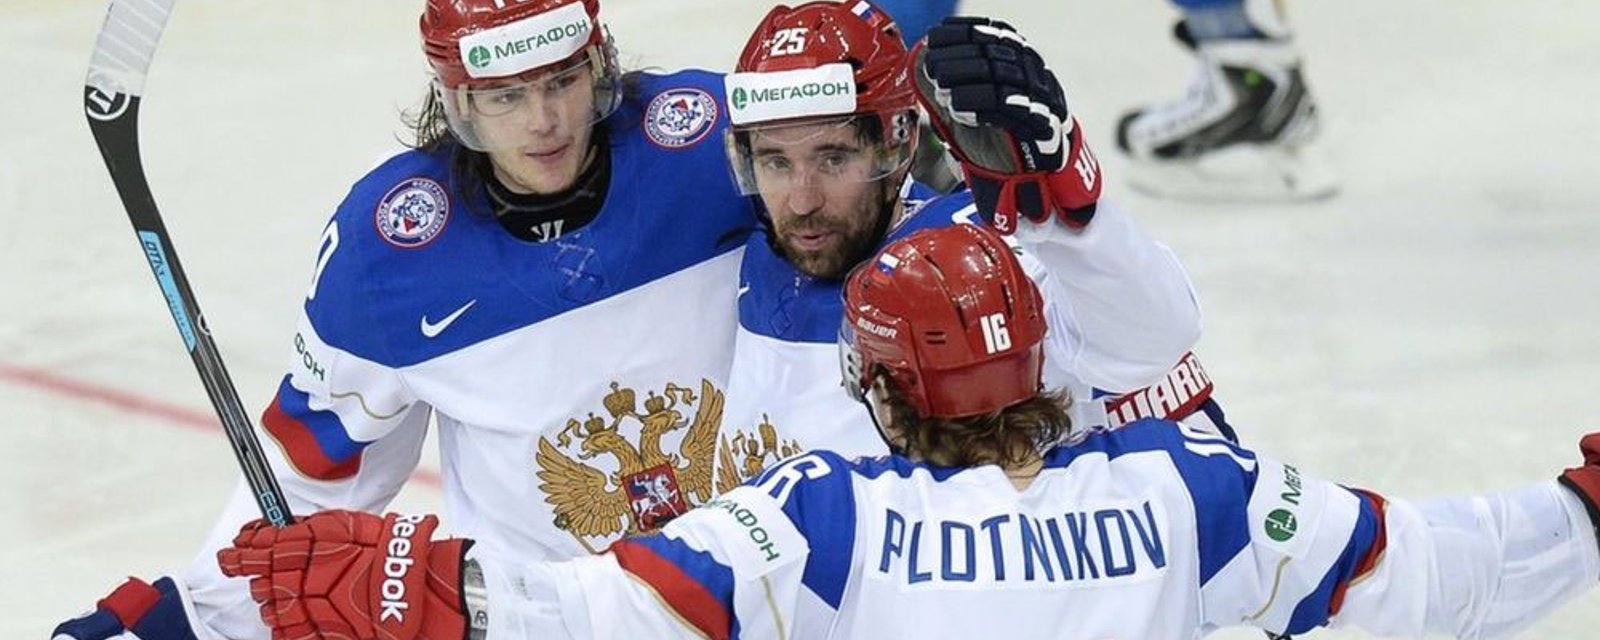 Breaking: KHL star to sign with NHL club after doping suspension